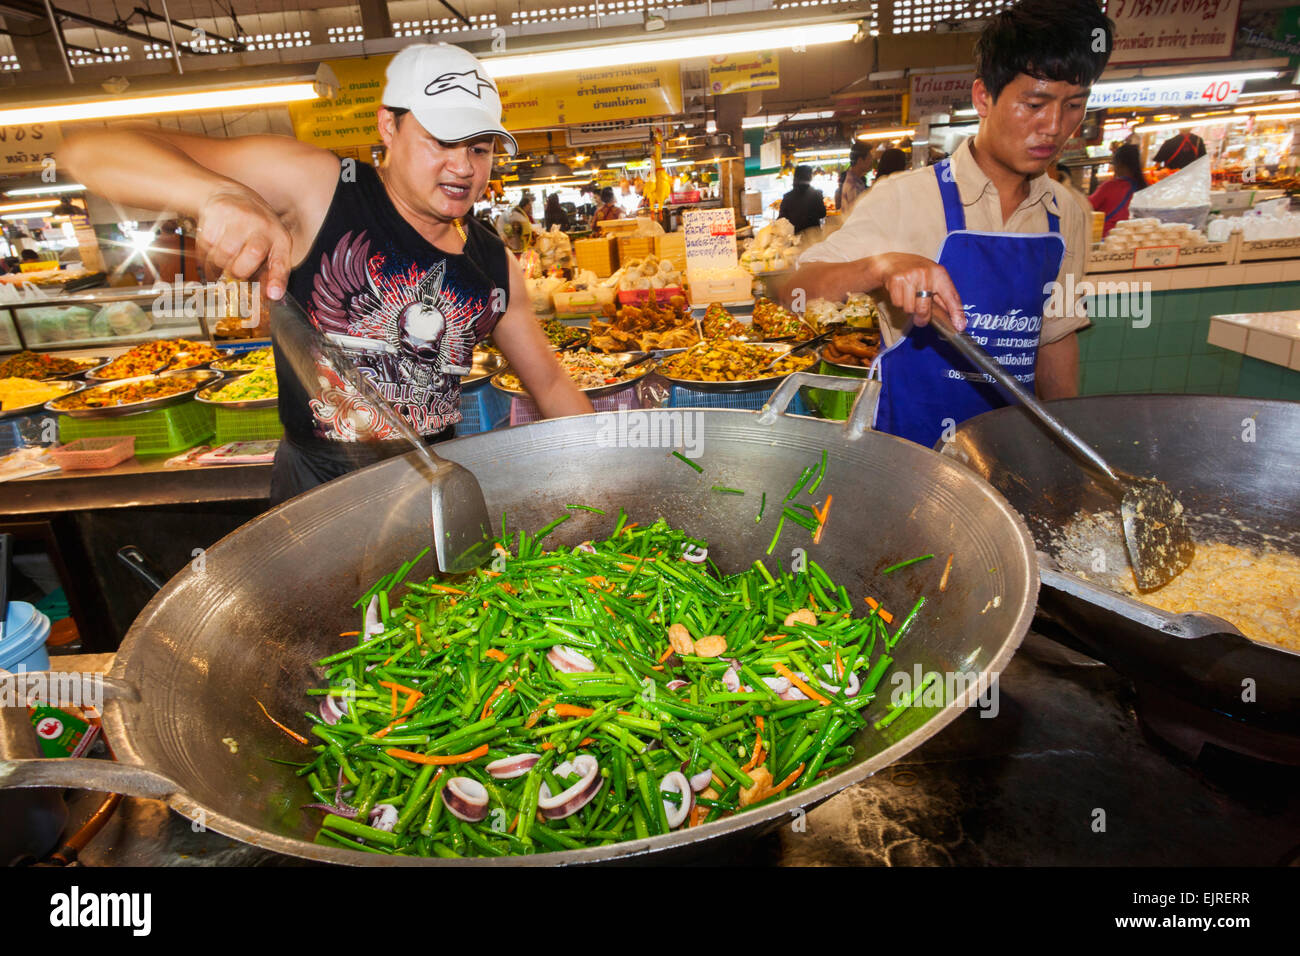 Thailand, Chiang Mai, Warorot Market, Chef Cooking Takeaway Food in Giant  Wok Stock Photo - Alamy